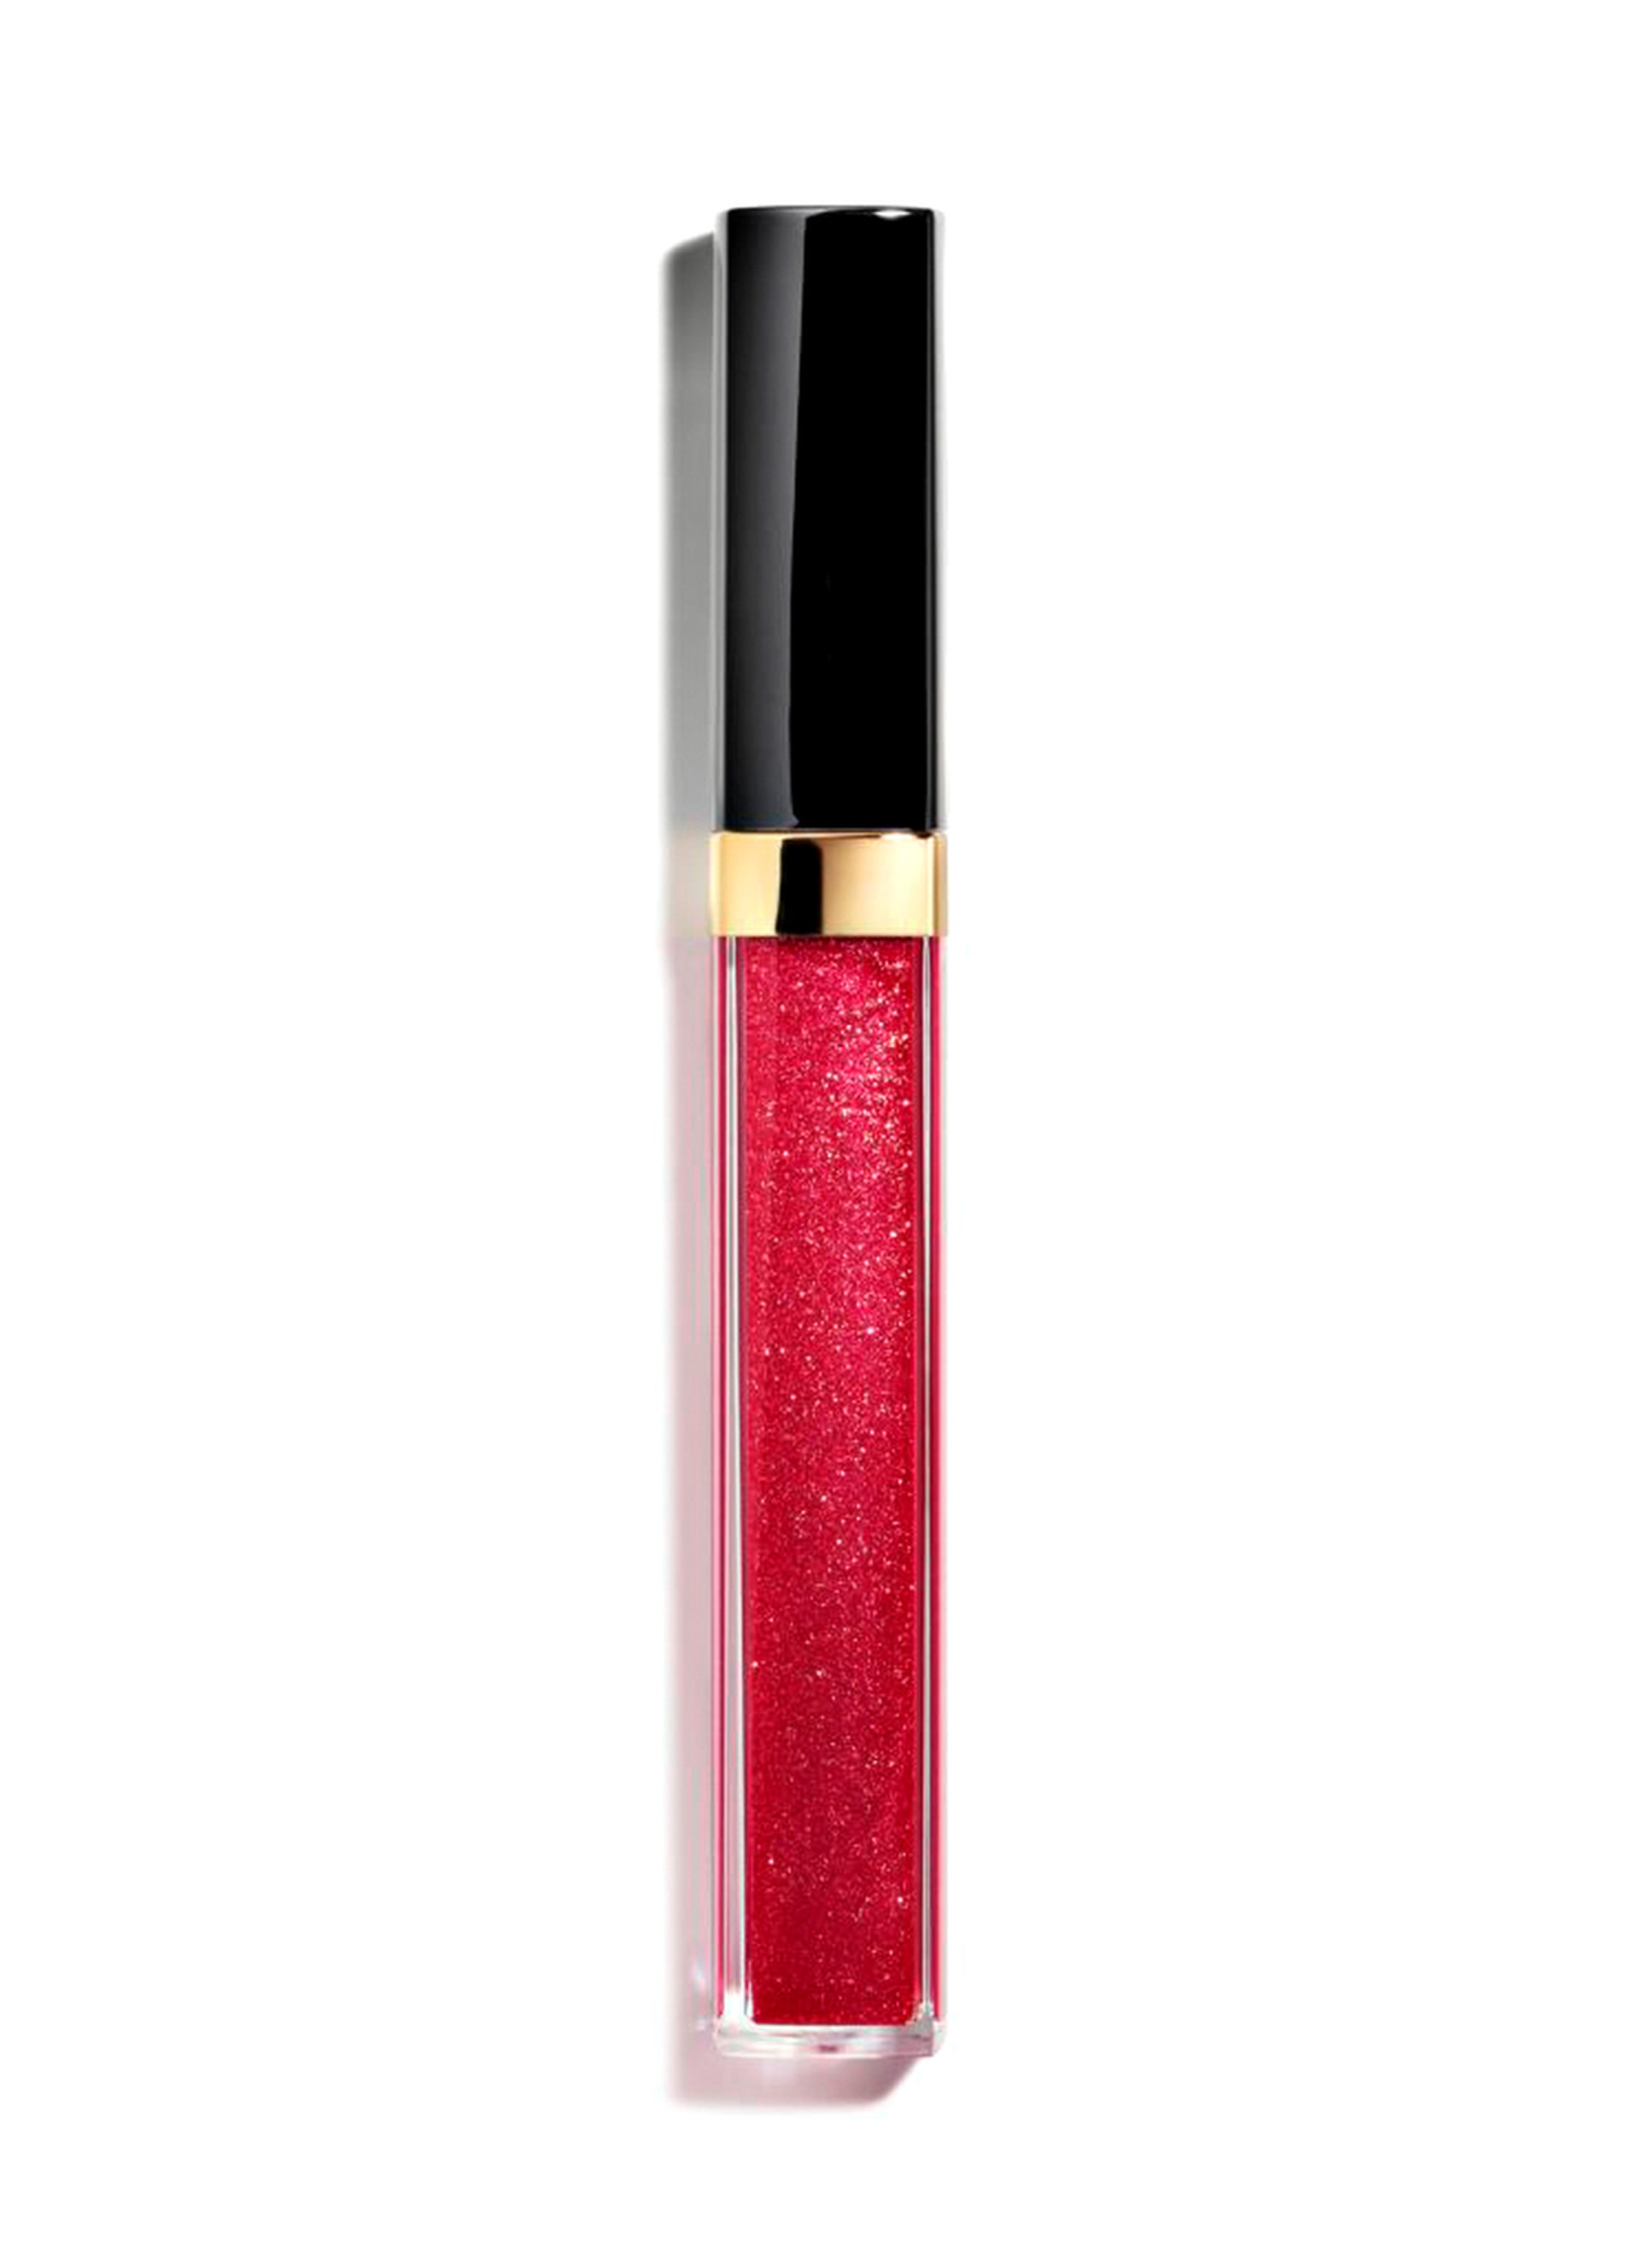 CHANEL ROUGE COCO GLOSS Feuchtigkeitsspendender Lipgloss